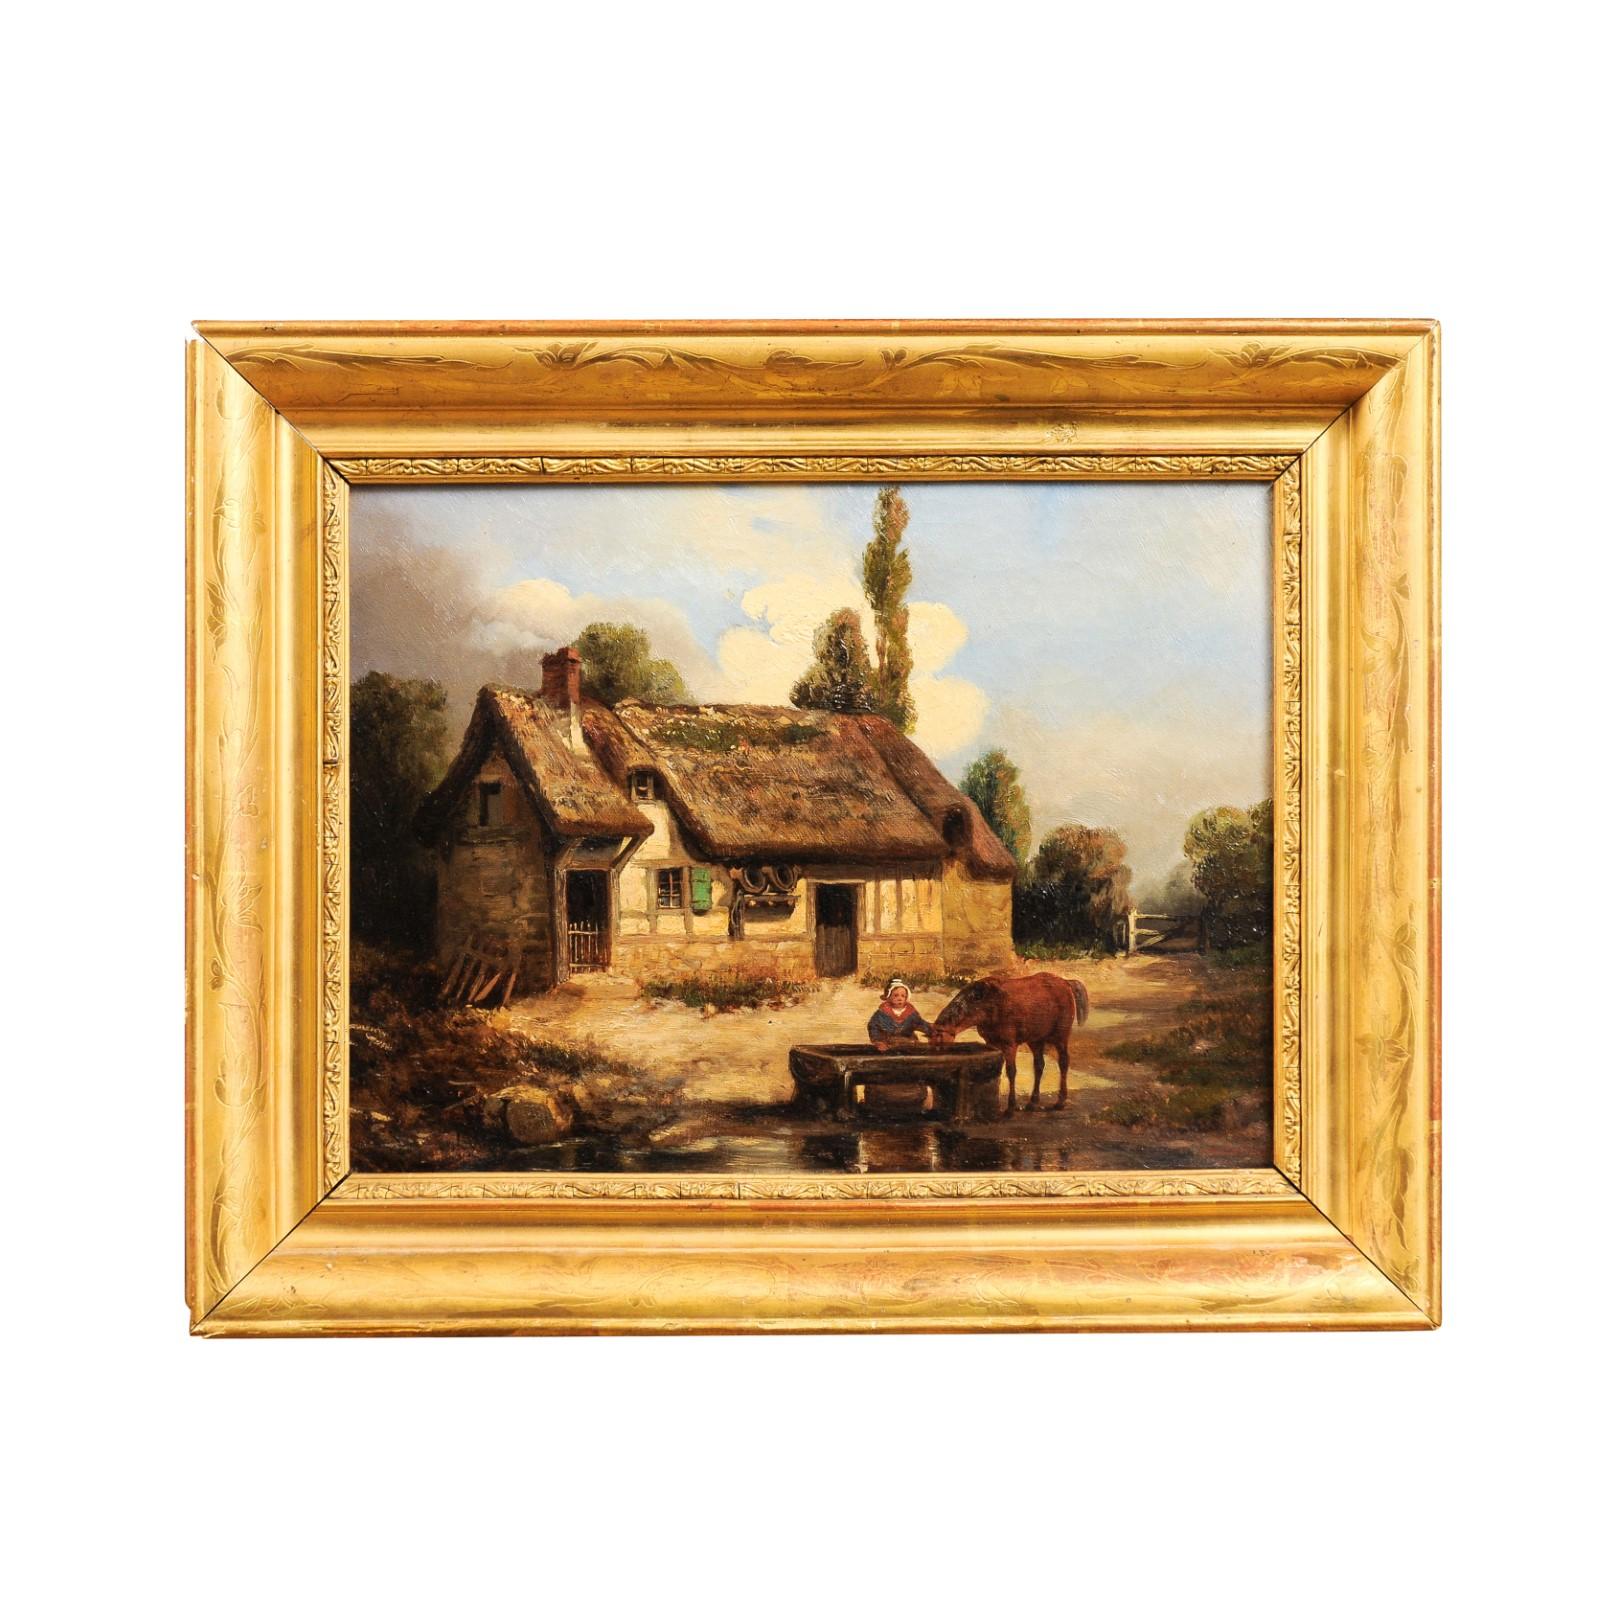 A French oil on canvas painting from the 19th century, signed by the artist Léon Bertan, capturing a bucolic farm scene steeped in tranquility and nostalgia. The painting is enveloped in an elegant giltwood frame, which complements the serene and